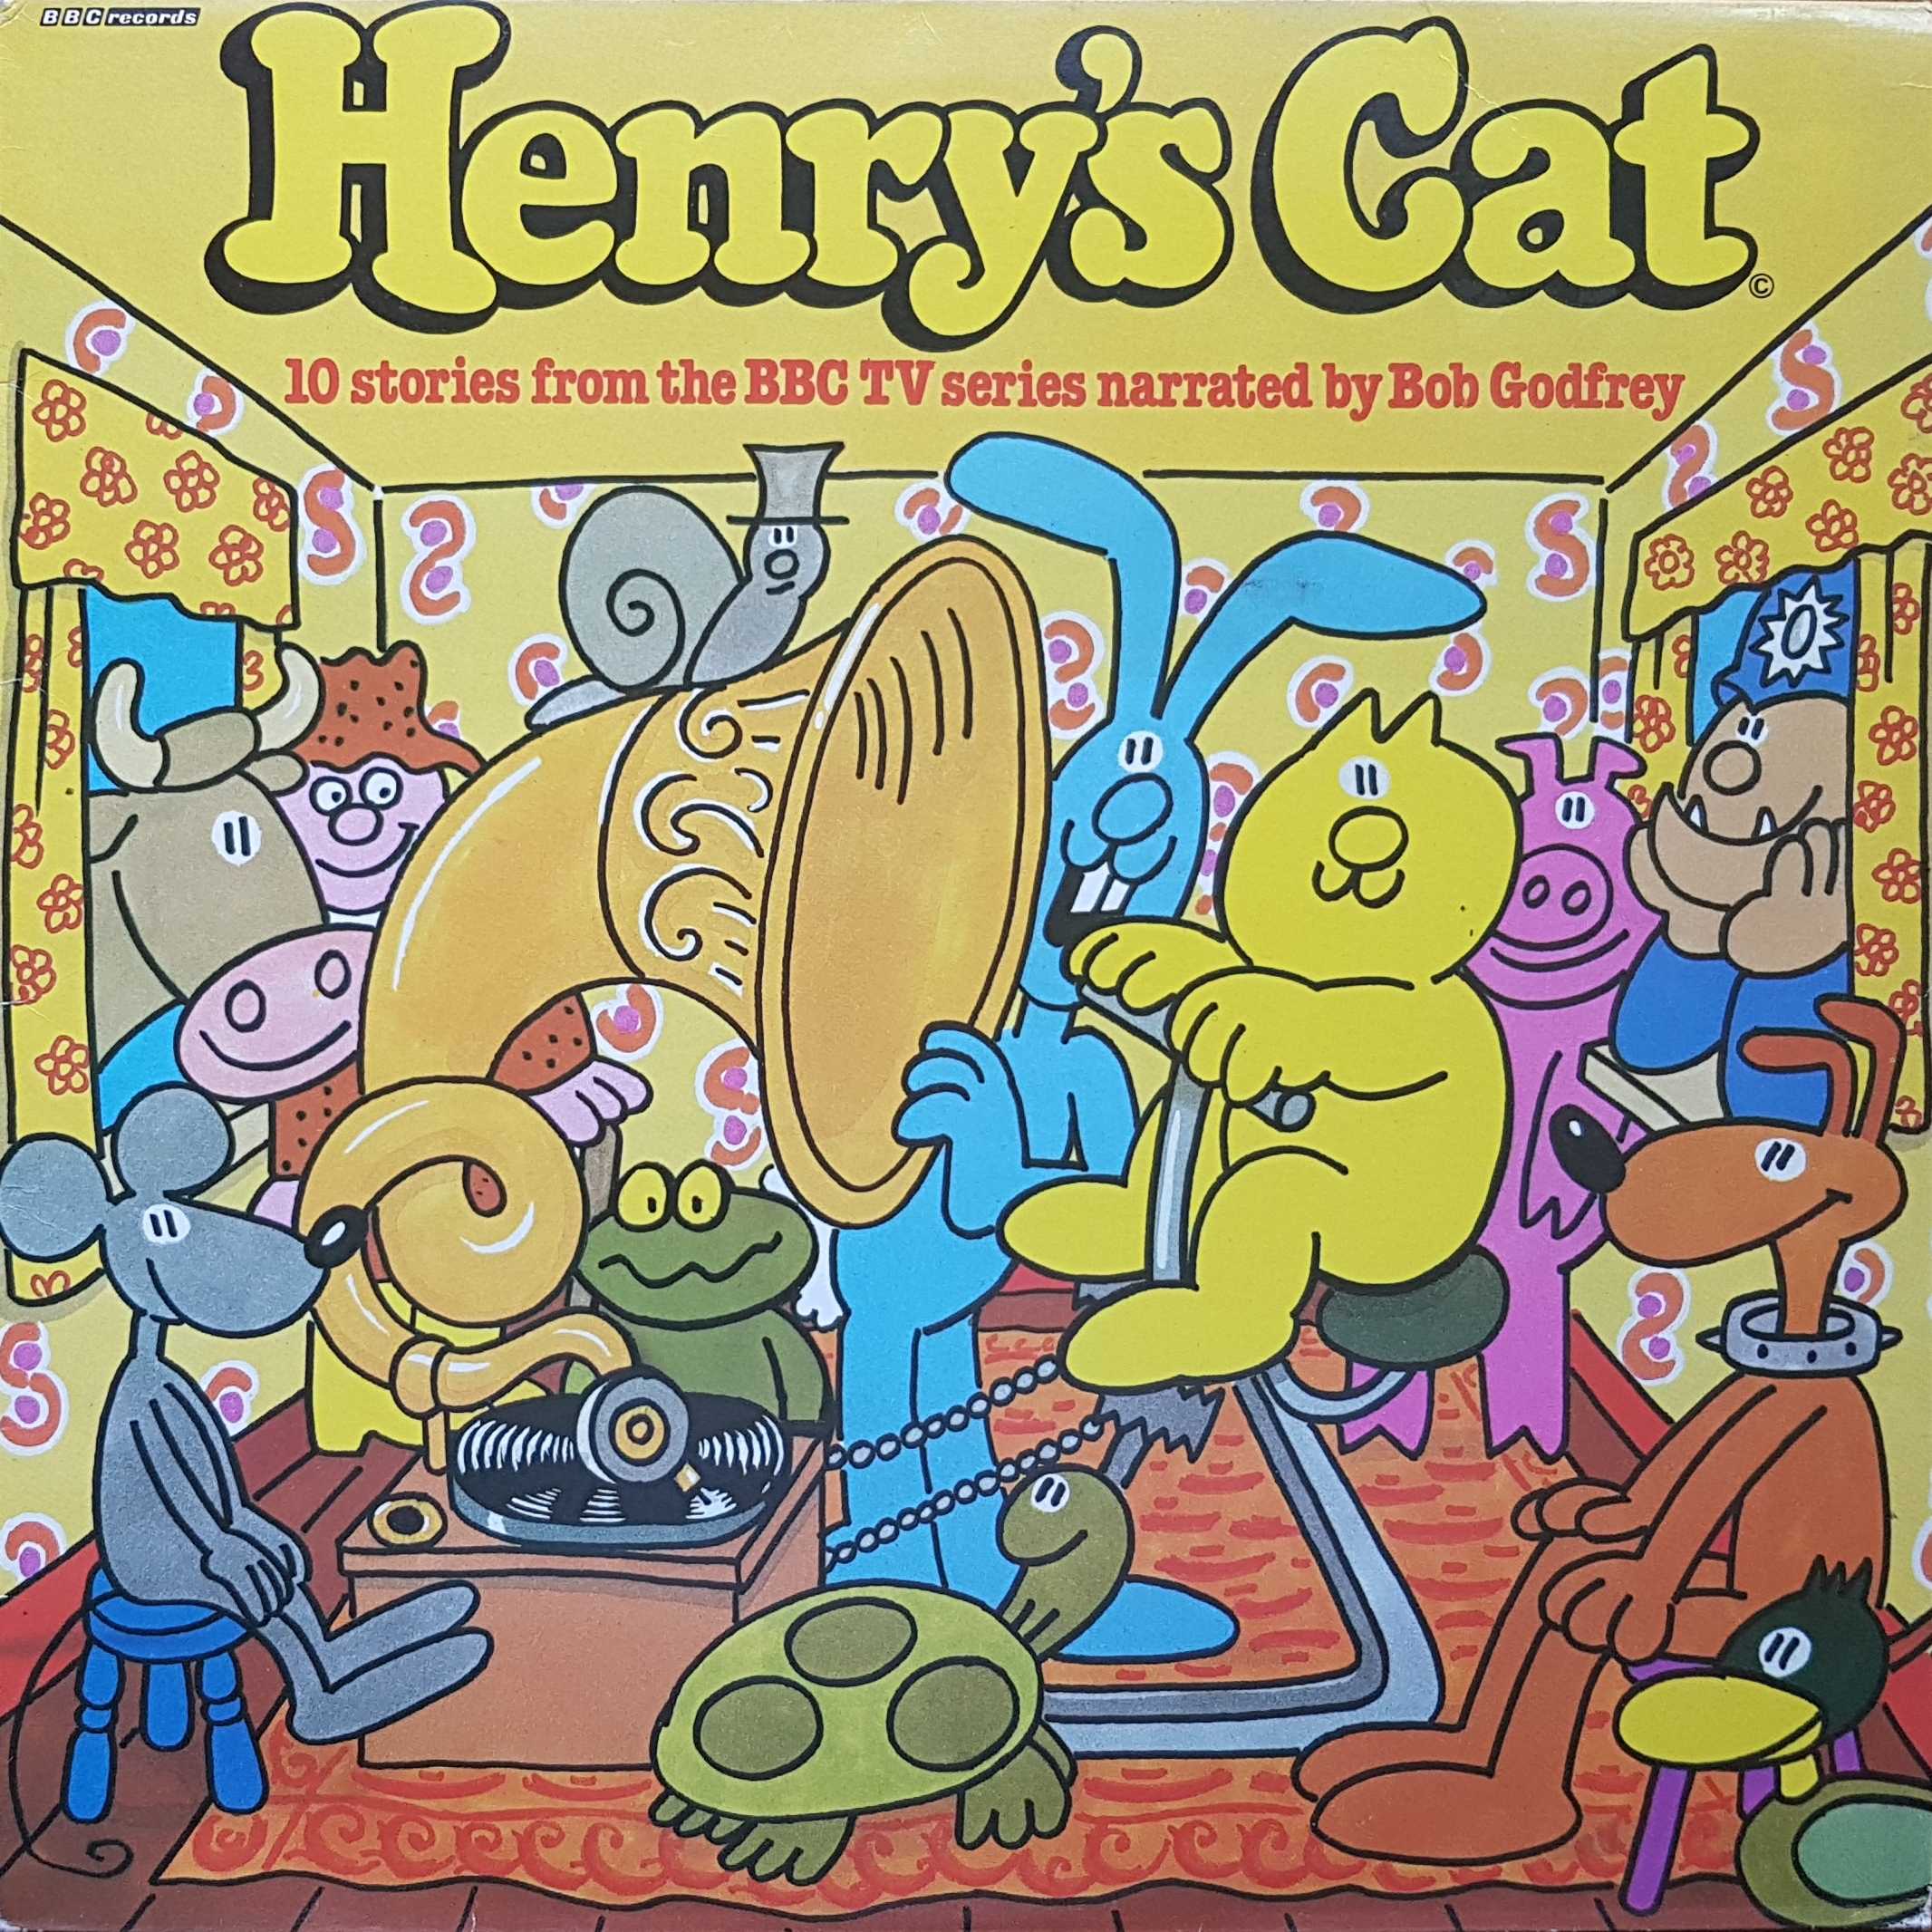 Picture of REC 482 Henry's cat by artist Stan Hayward from the BBC records and Tapes library